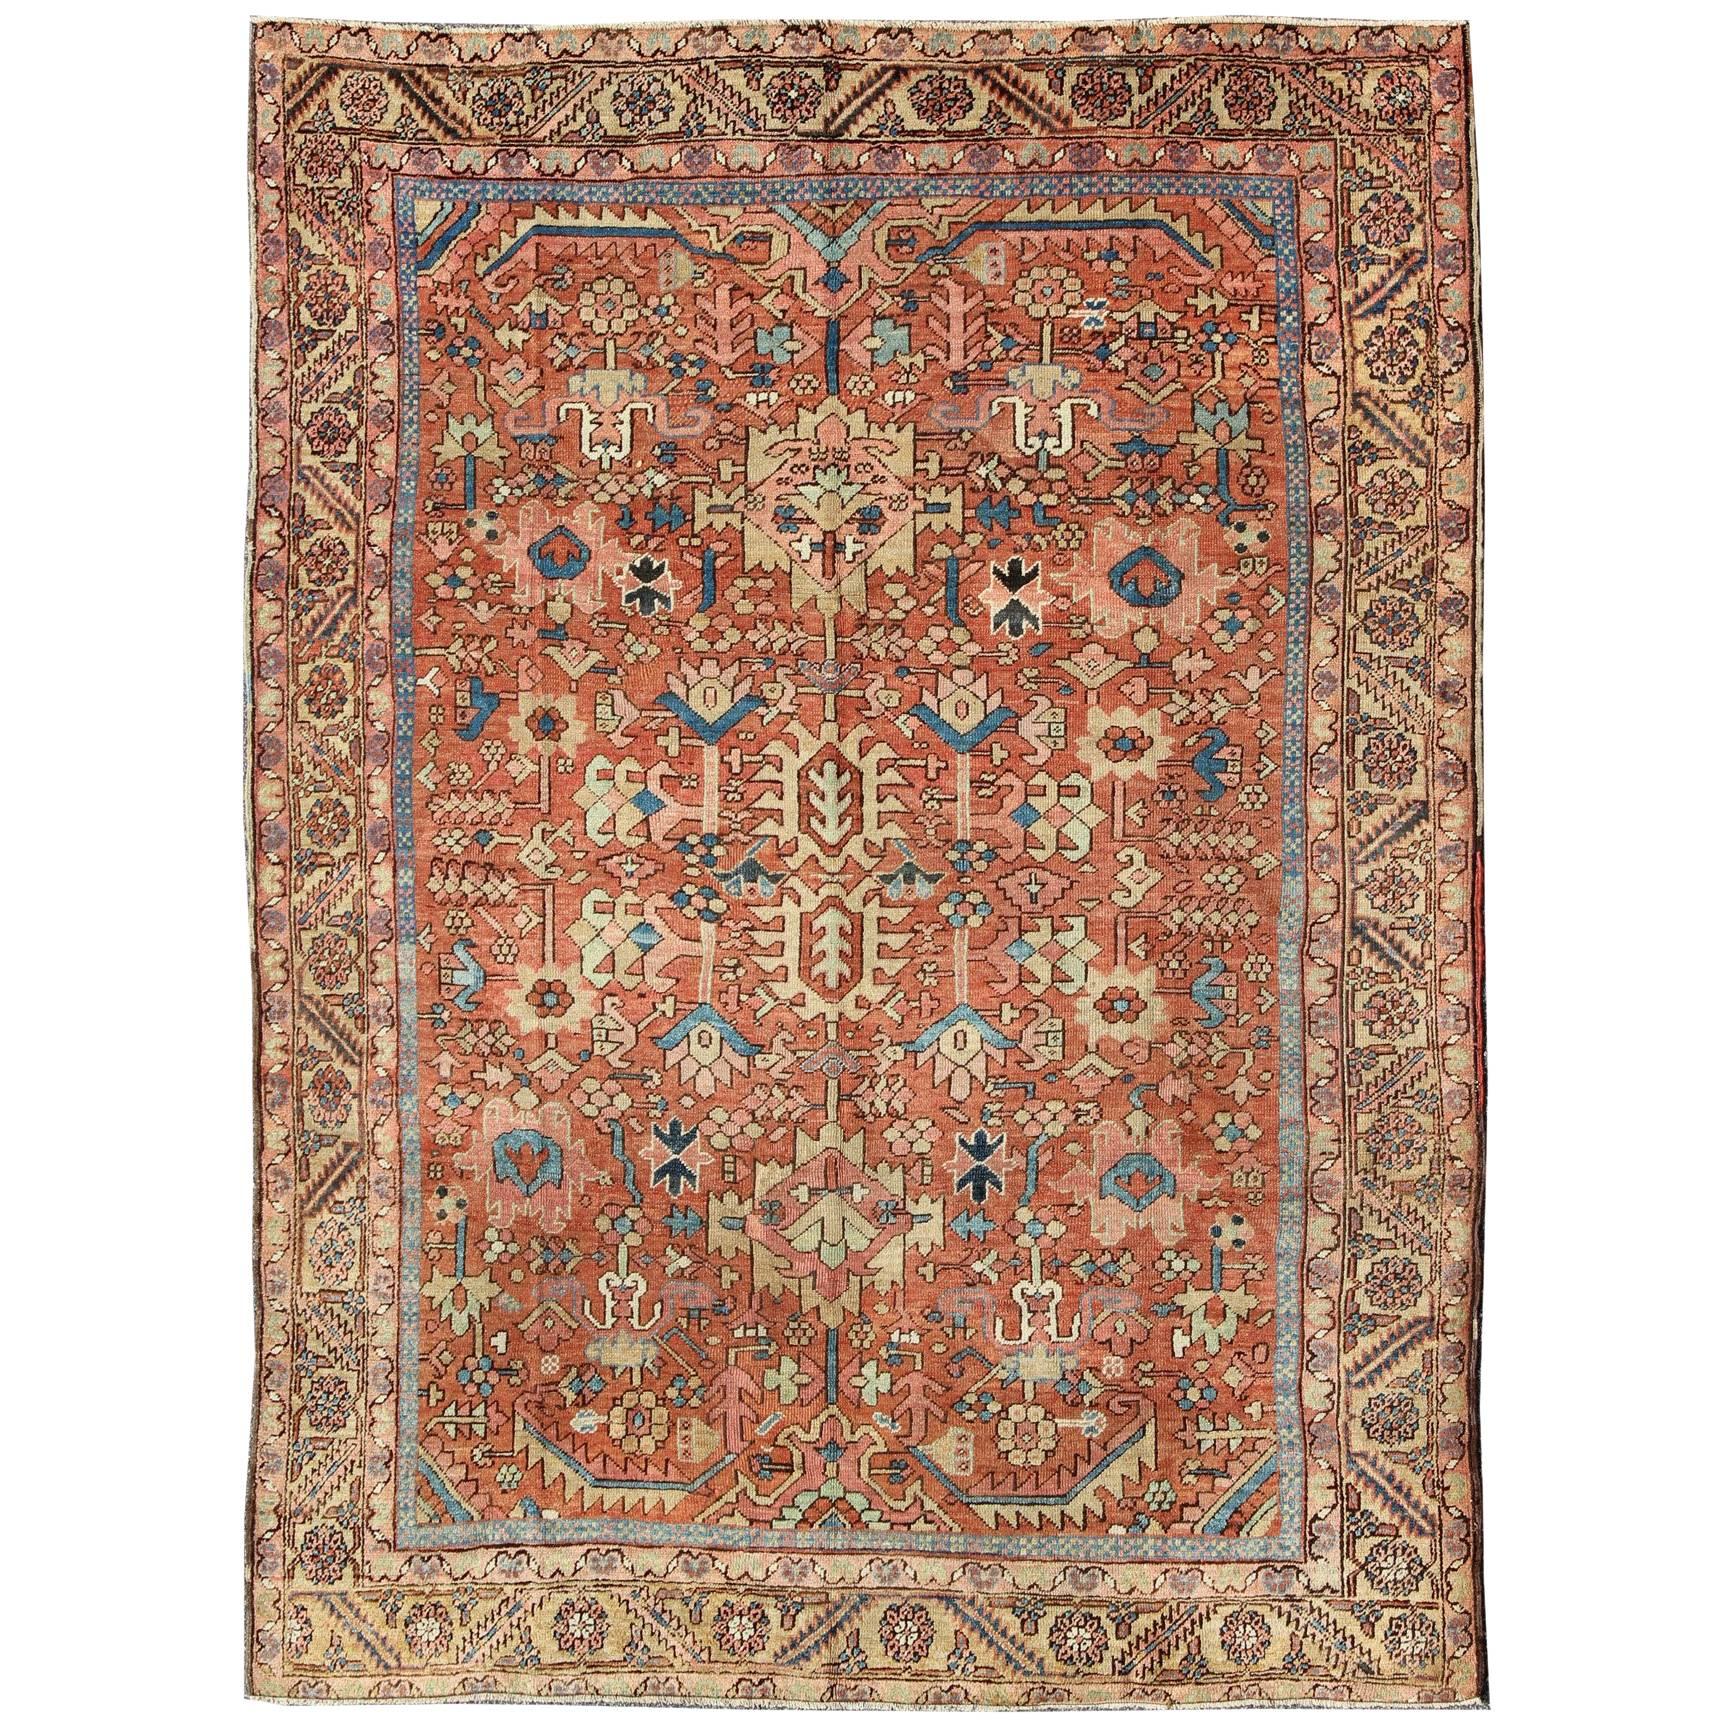 Antique All-Over Persian Heriz Rug in Faded Rust and Gold Colors